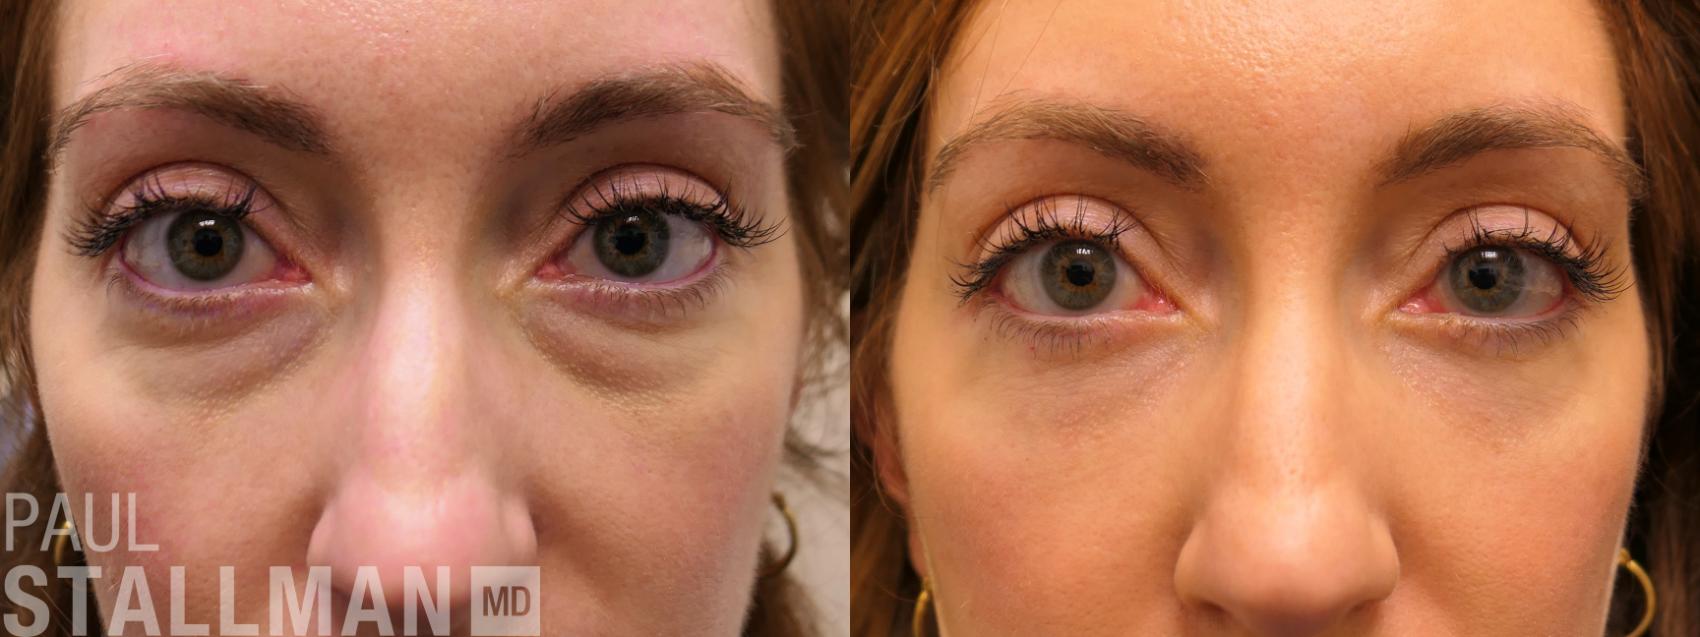 Before & After Blepharoplasty for Women Case 166 Front View in Fresno, Santa Maria, San Luis Obispo, CA